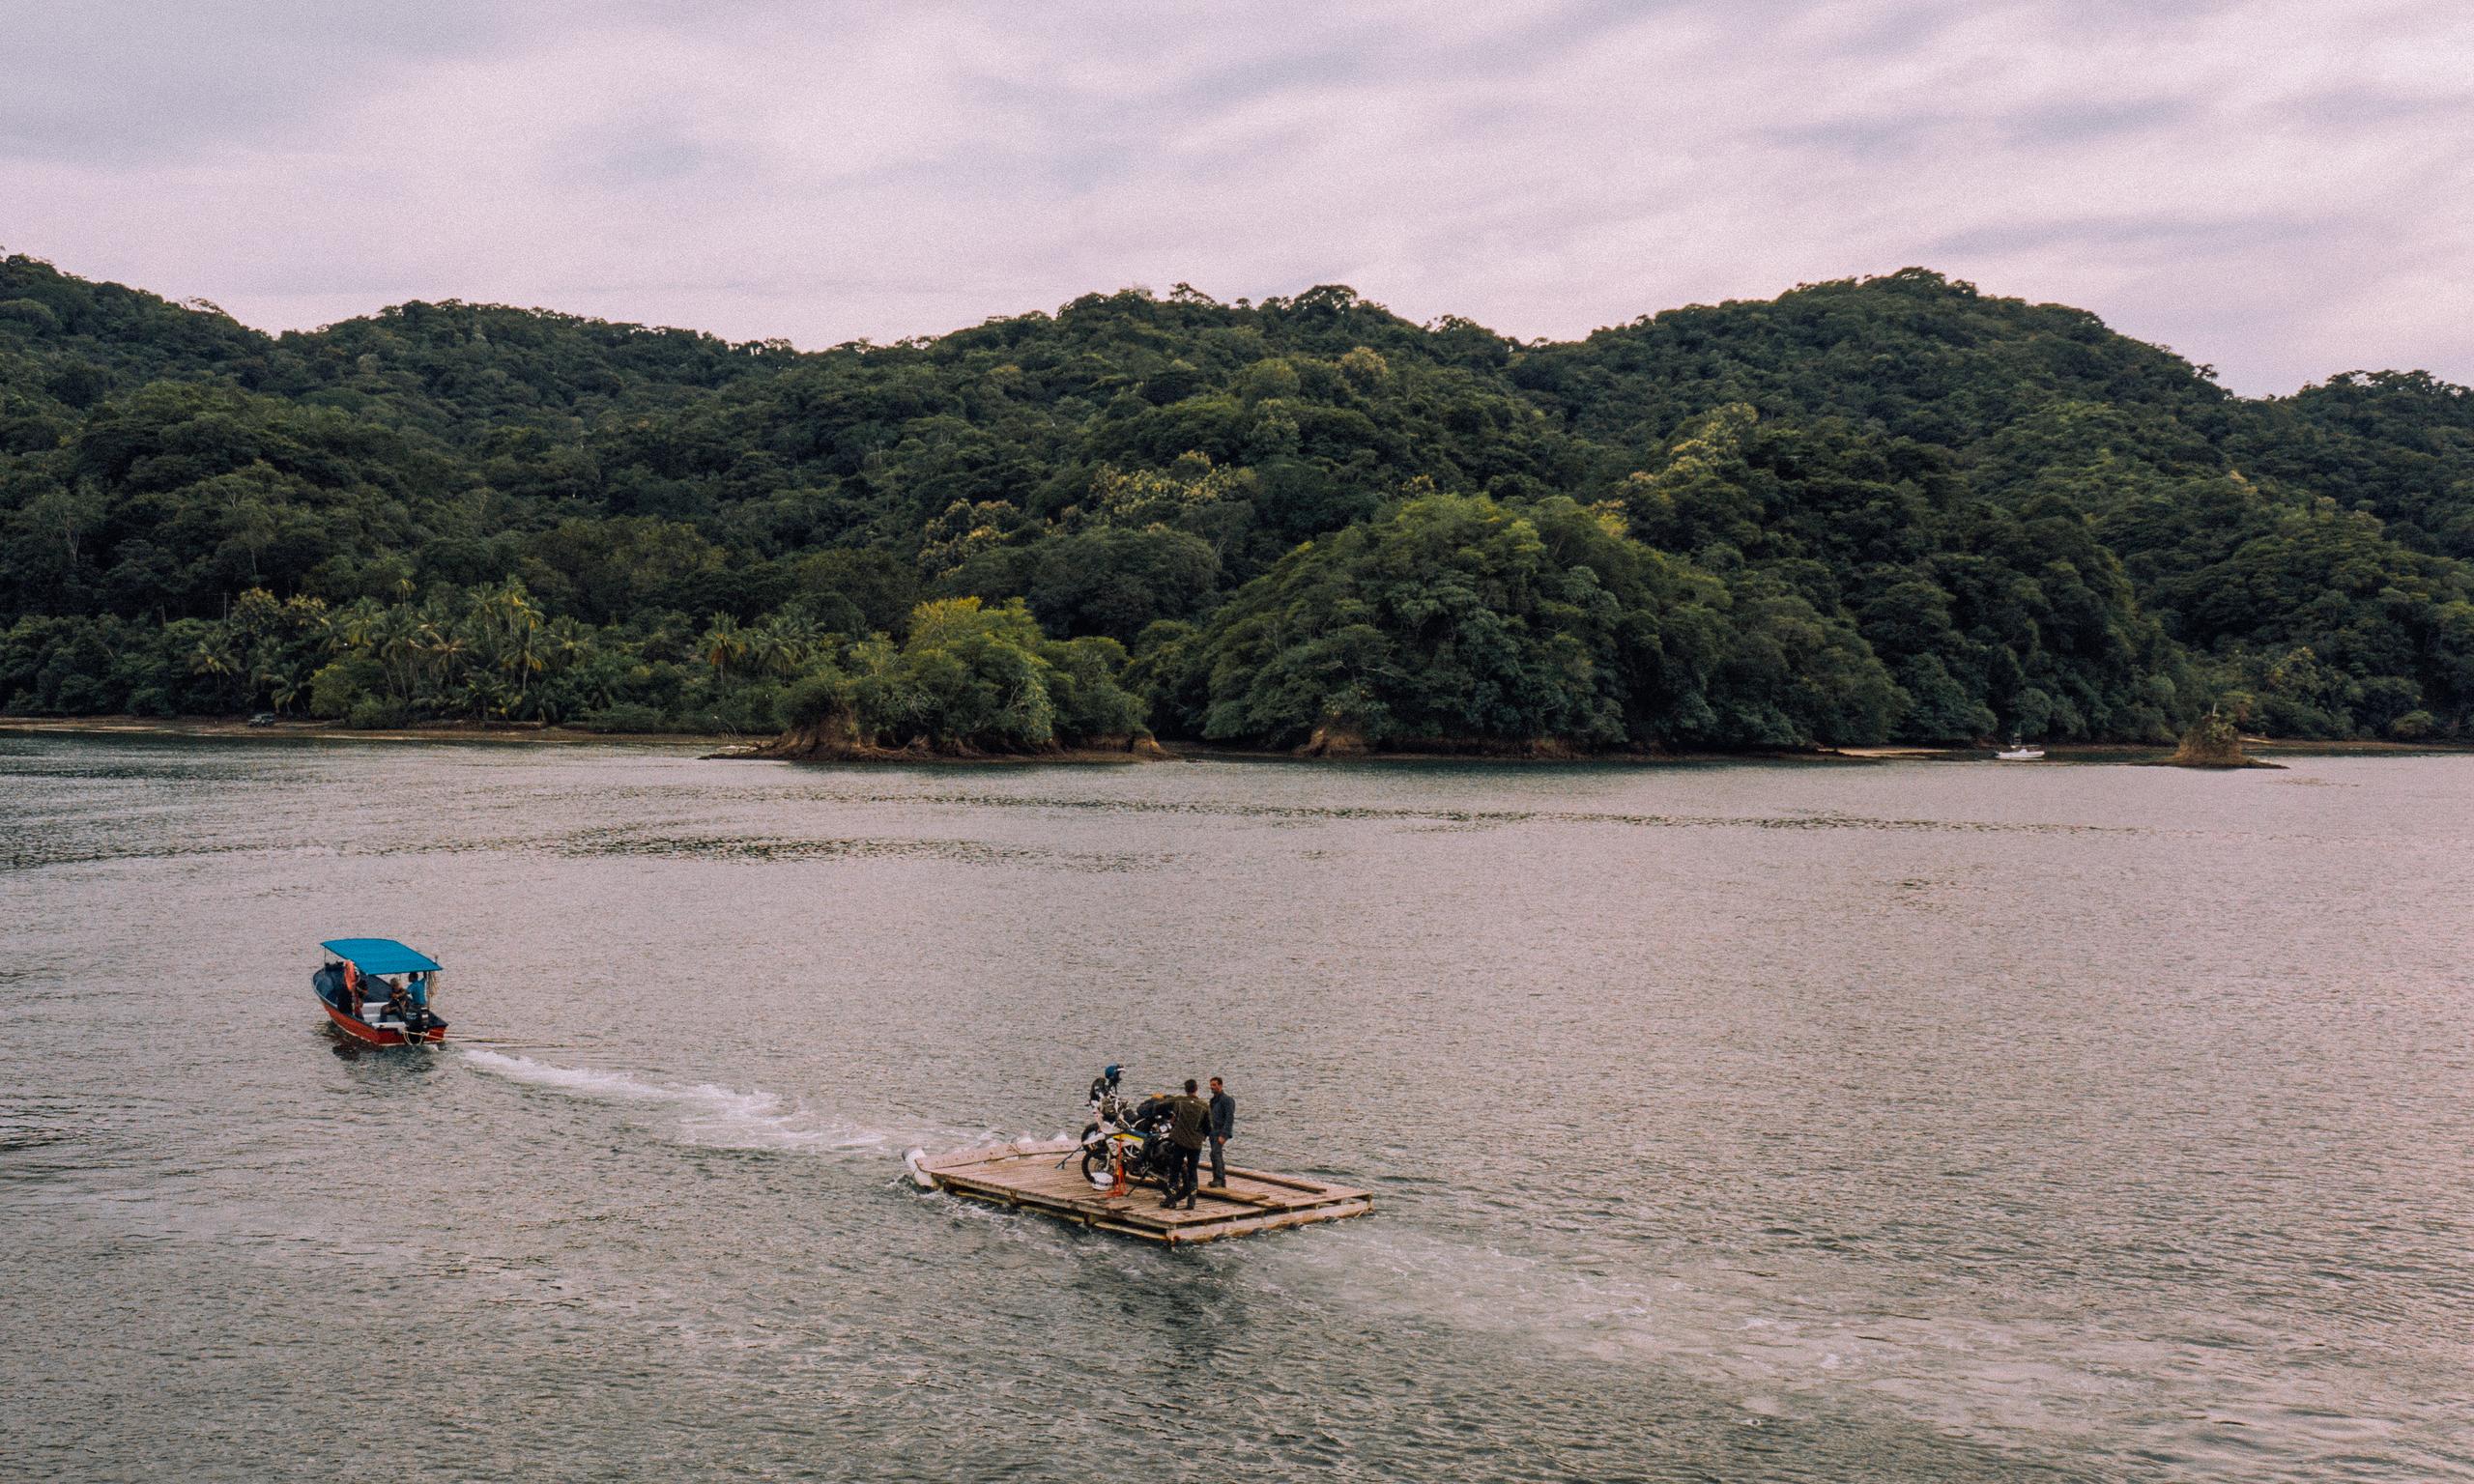 Transporting motorcycles on a raft across a river in Costa Rica